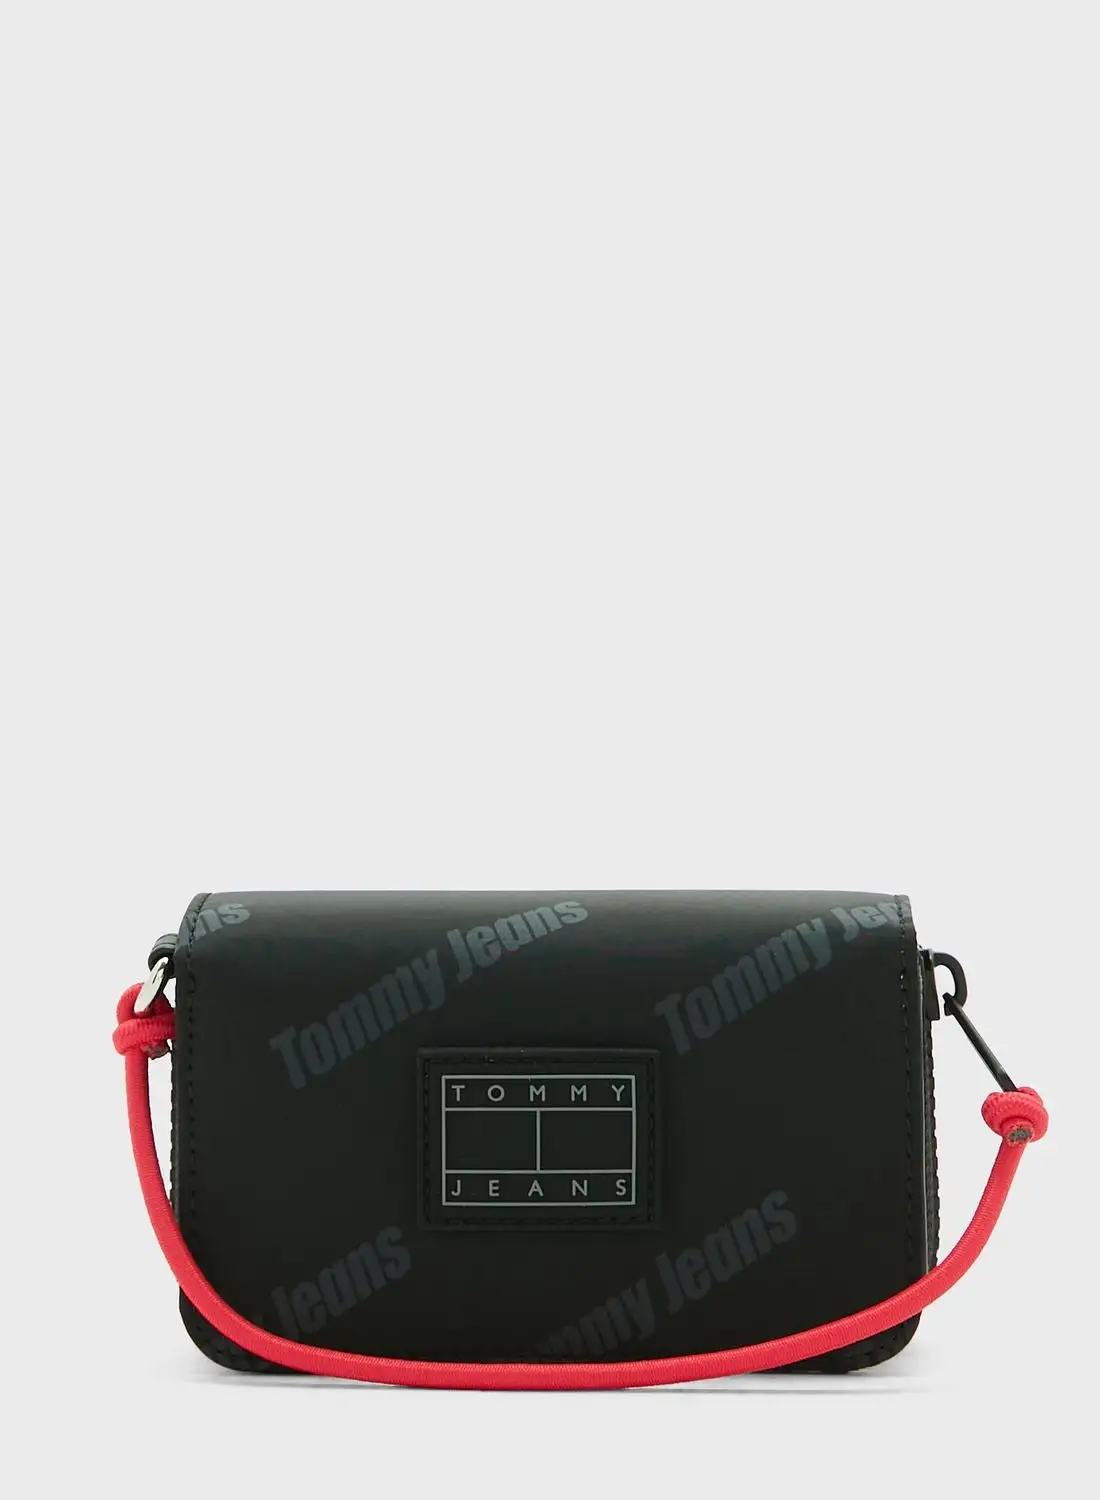 TOMMY HILFIGER Flap Over Clutch